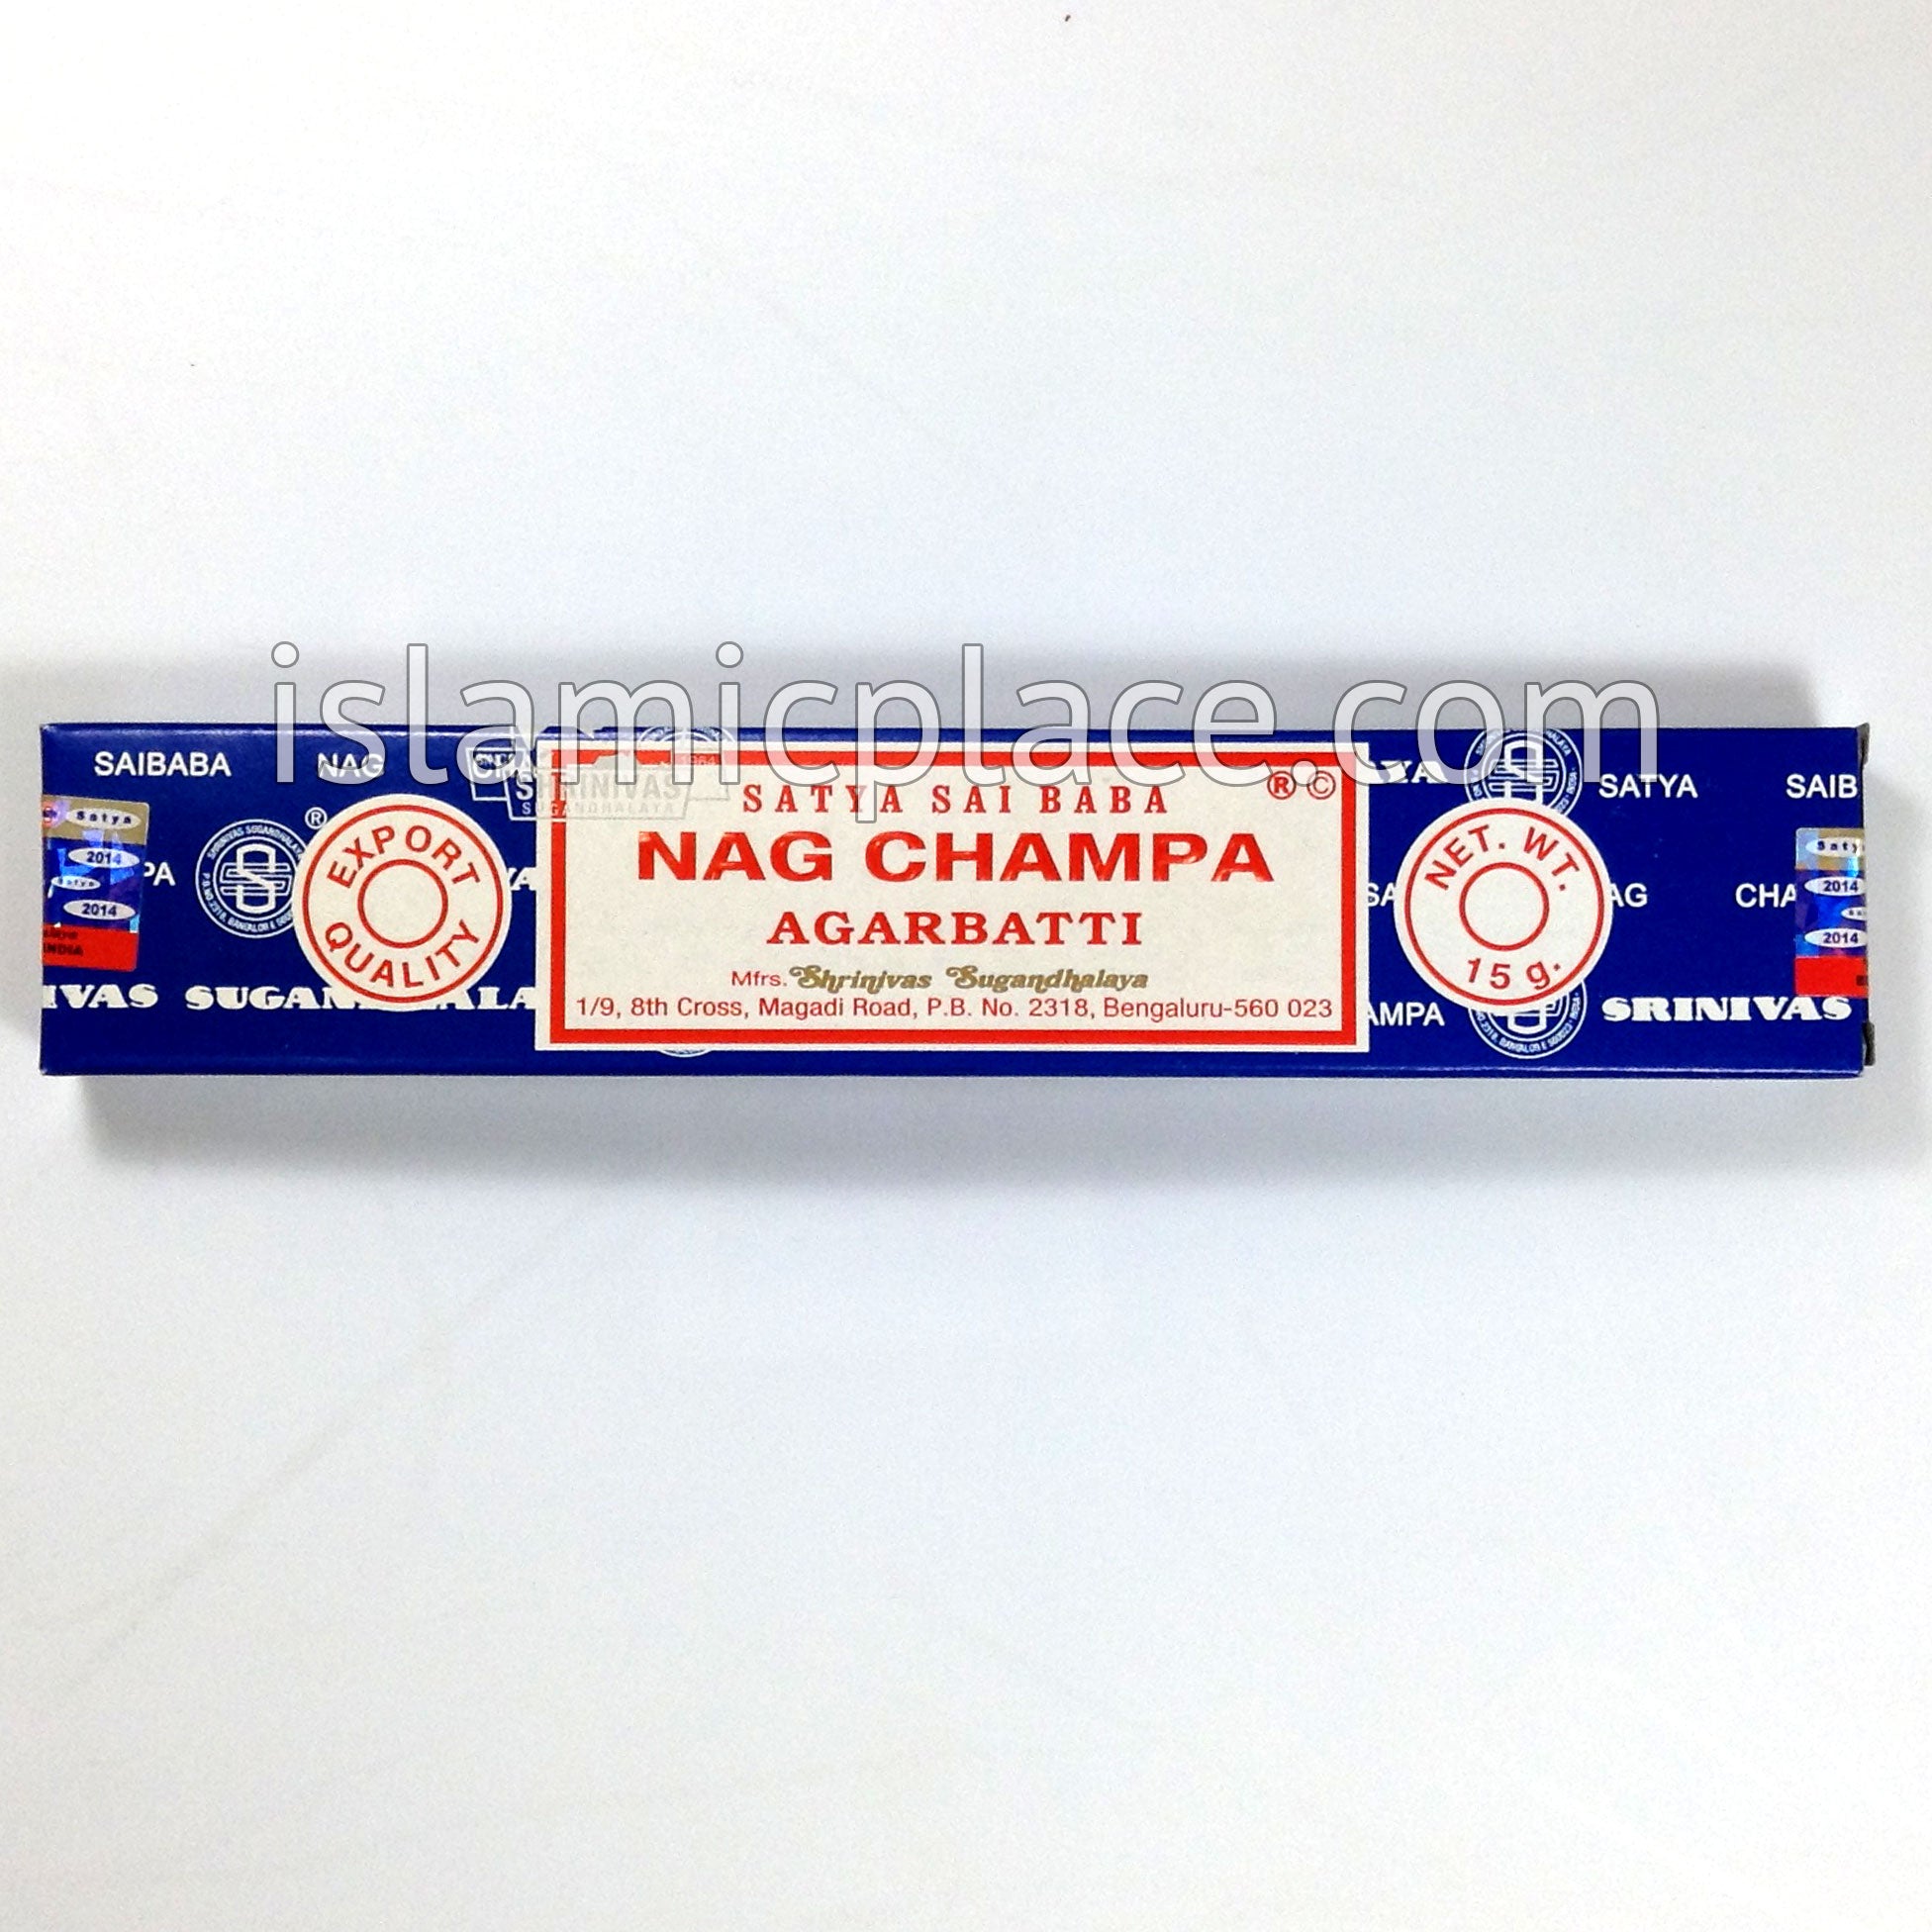 What is Nag Champa?